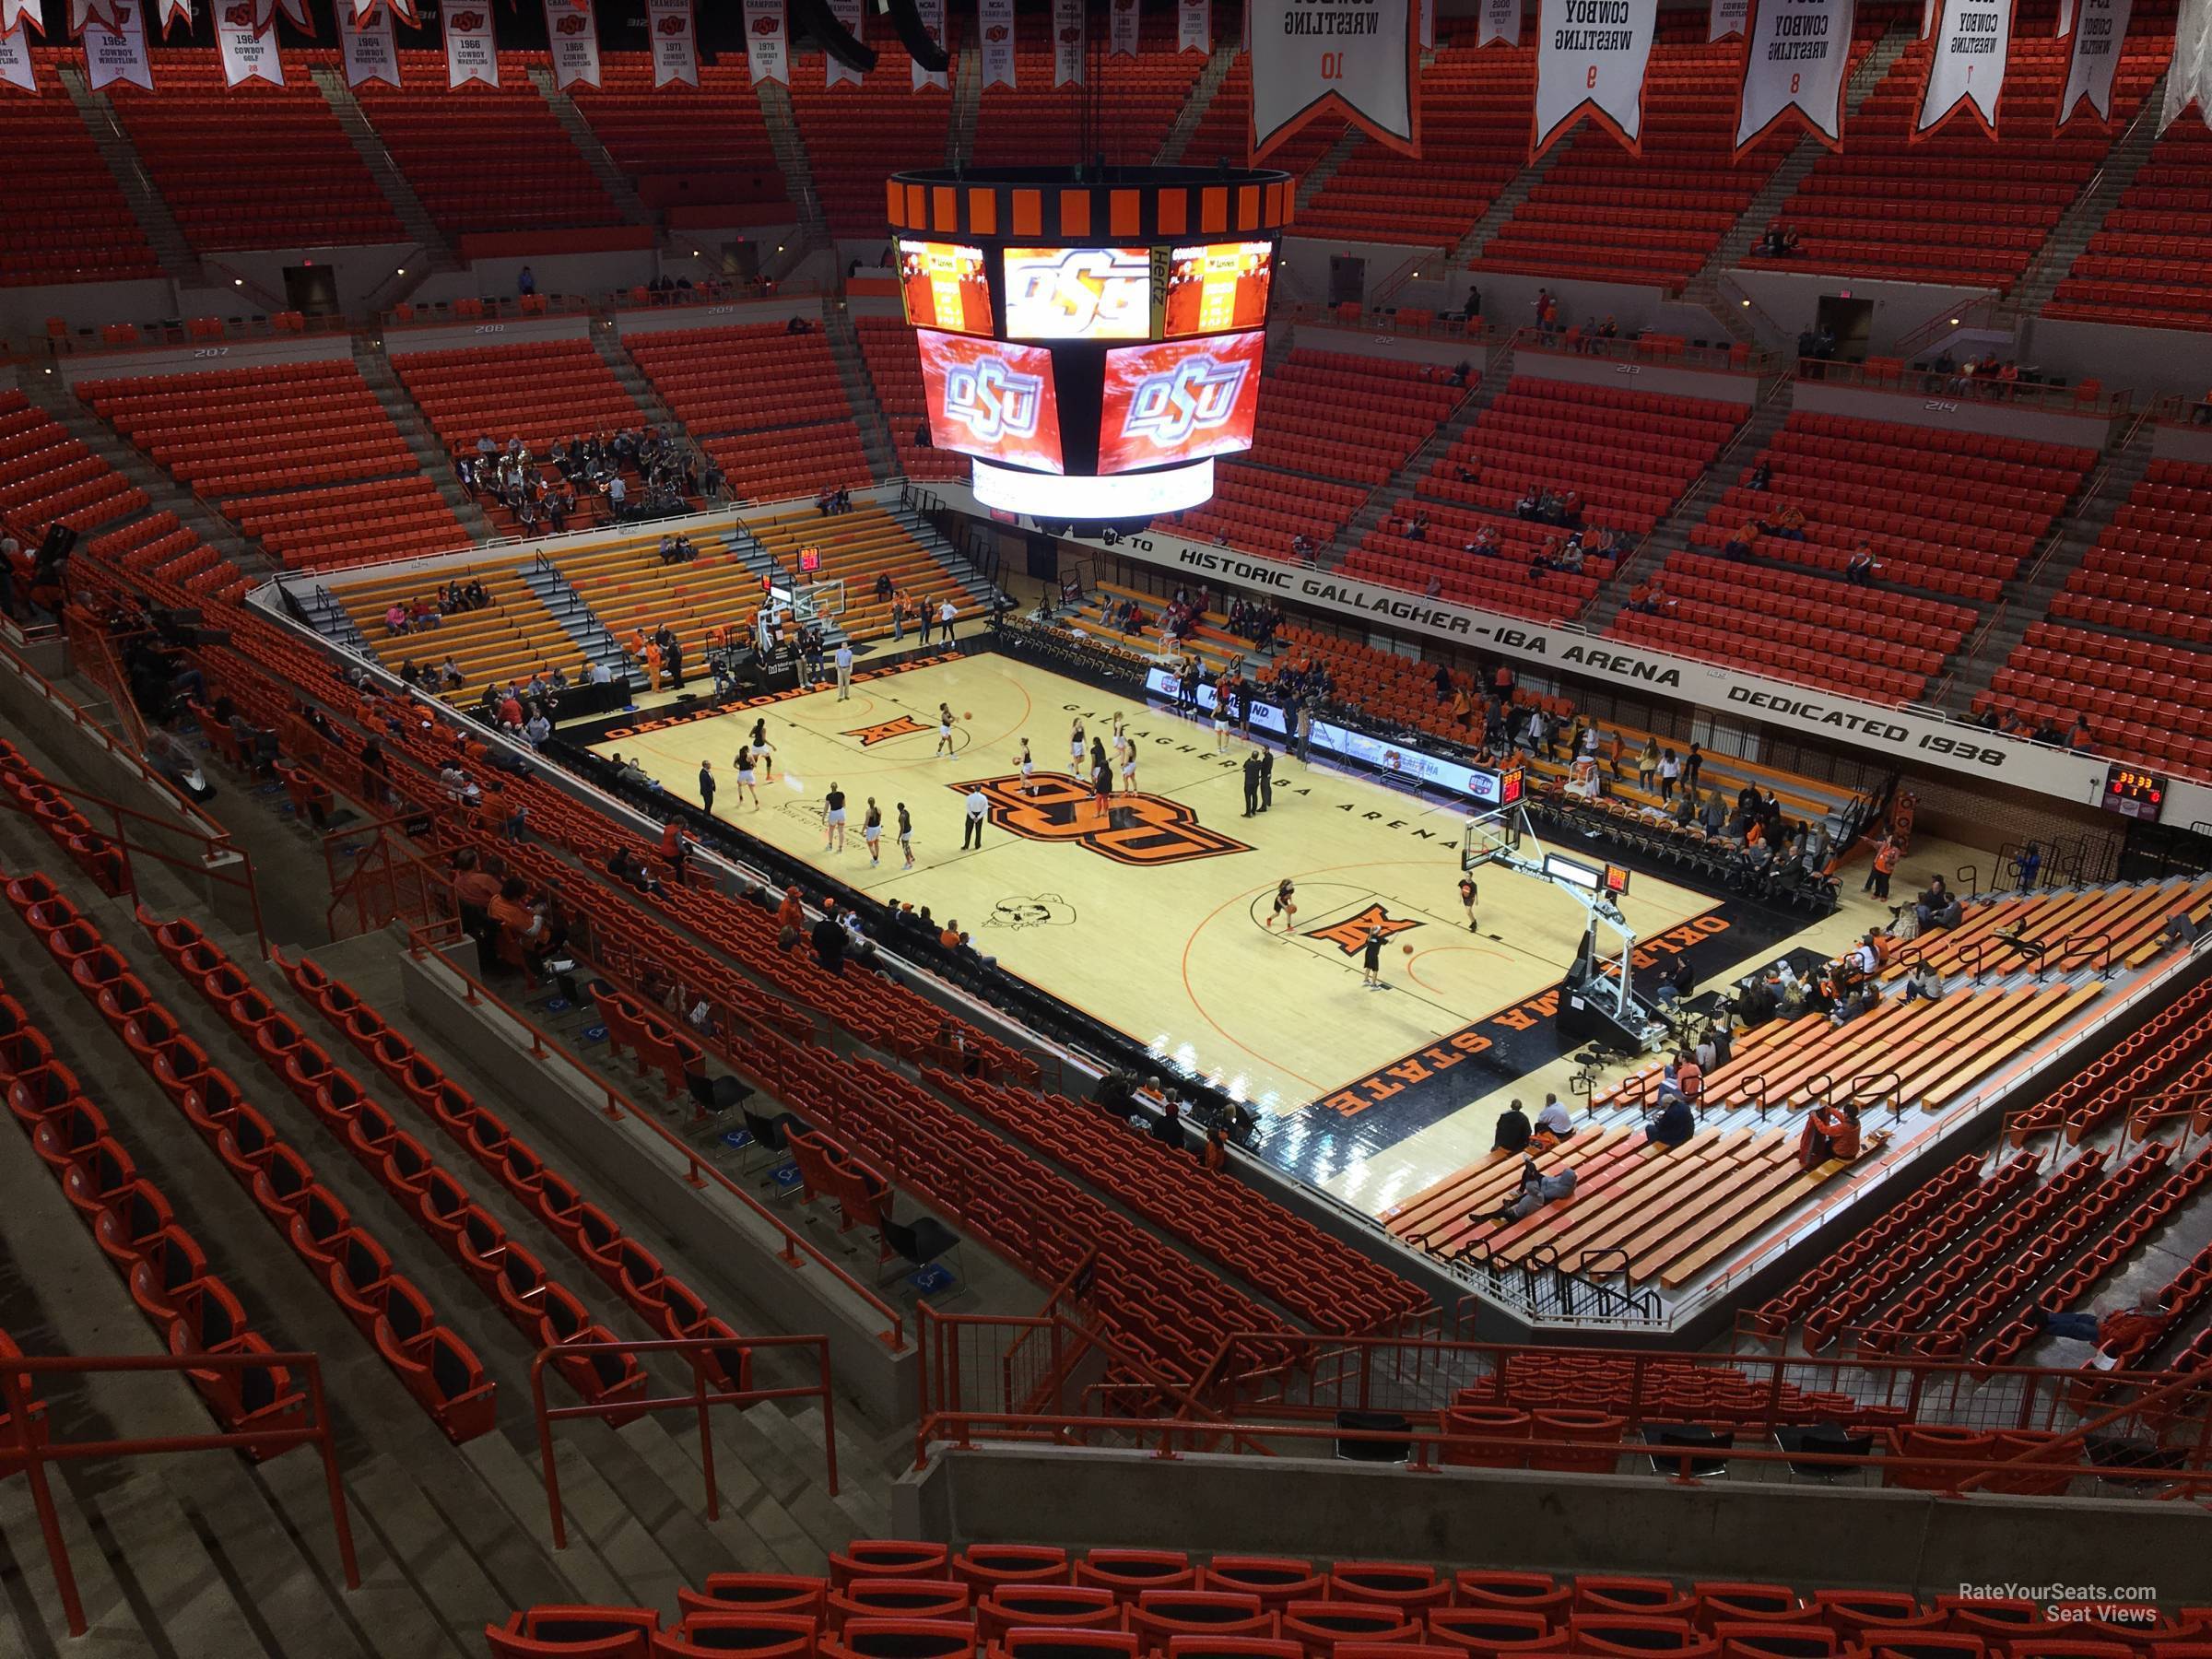 section 328, row 10 seat view  - gallagher-iba arena